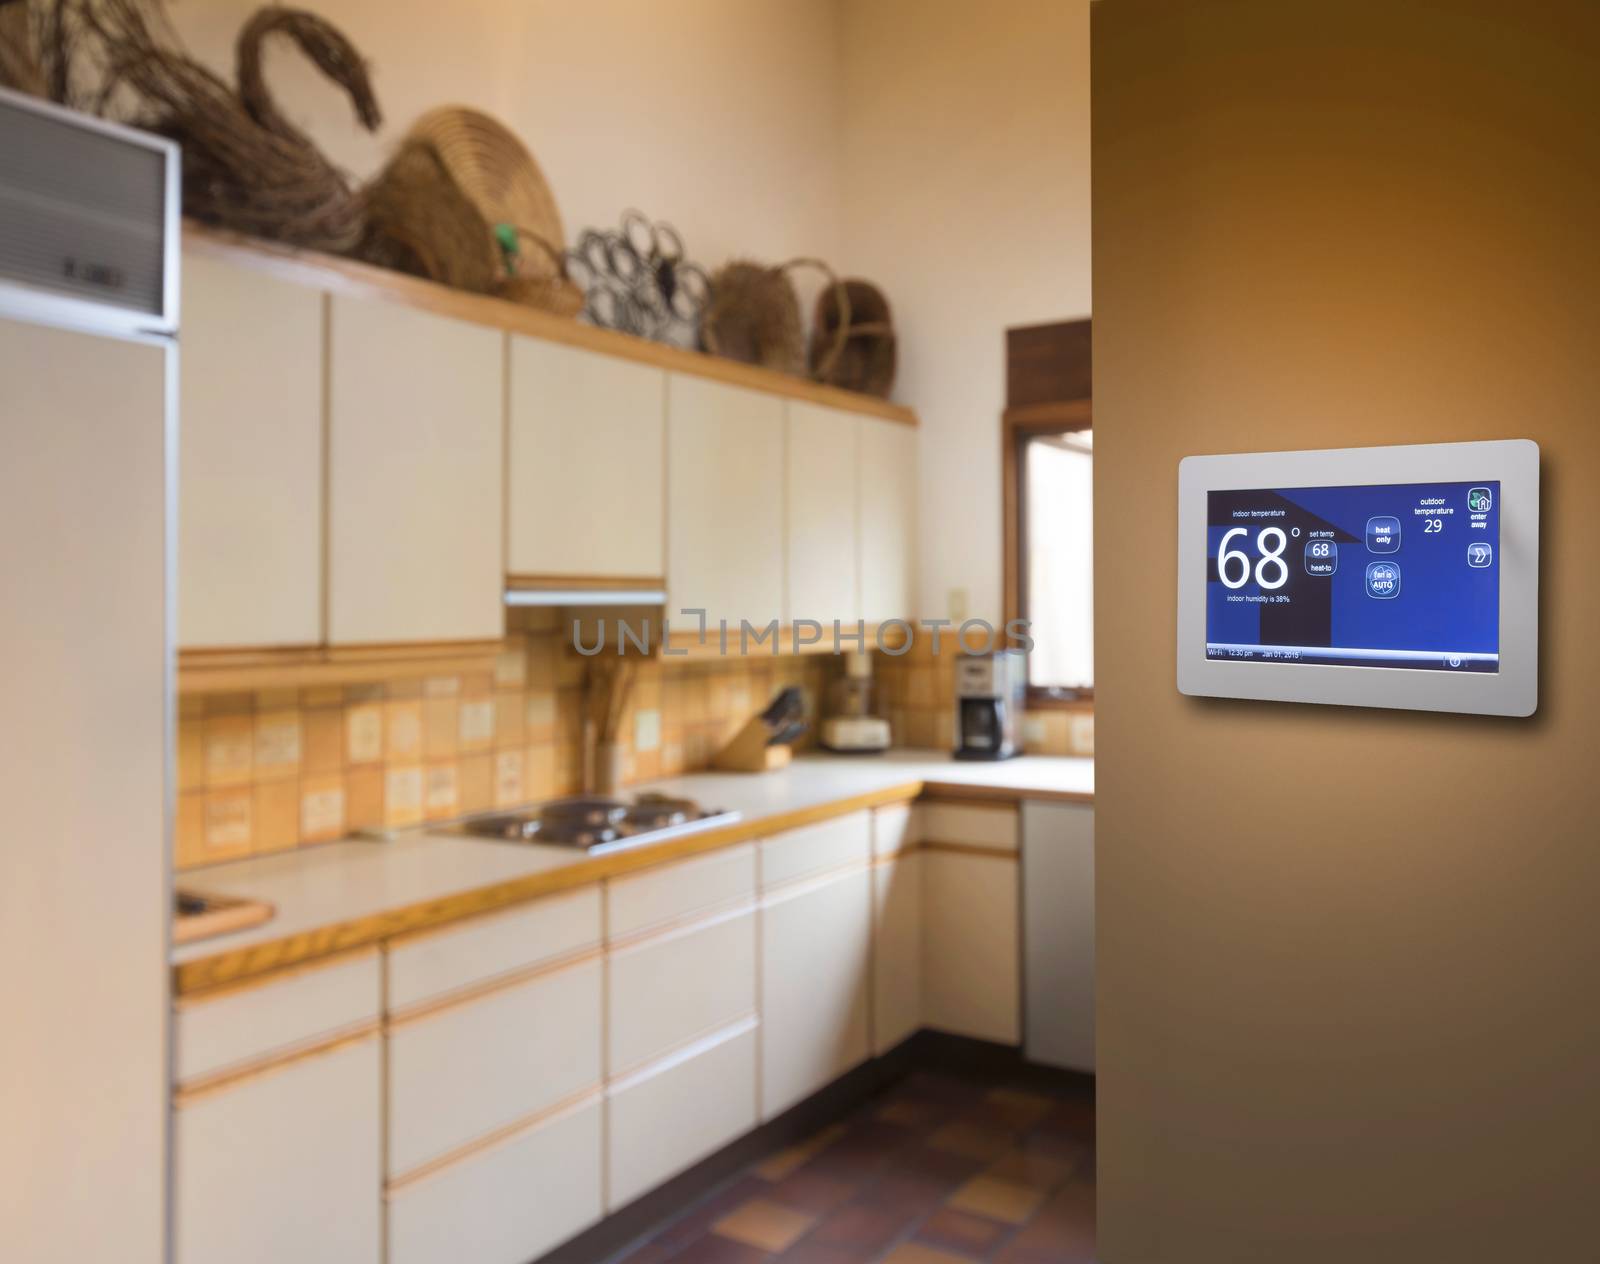 Programmable electronic thermostat for temperature control in kitchen